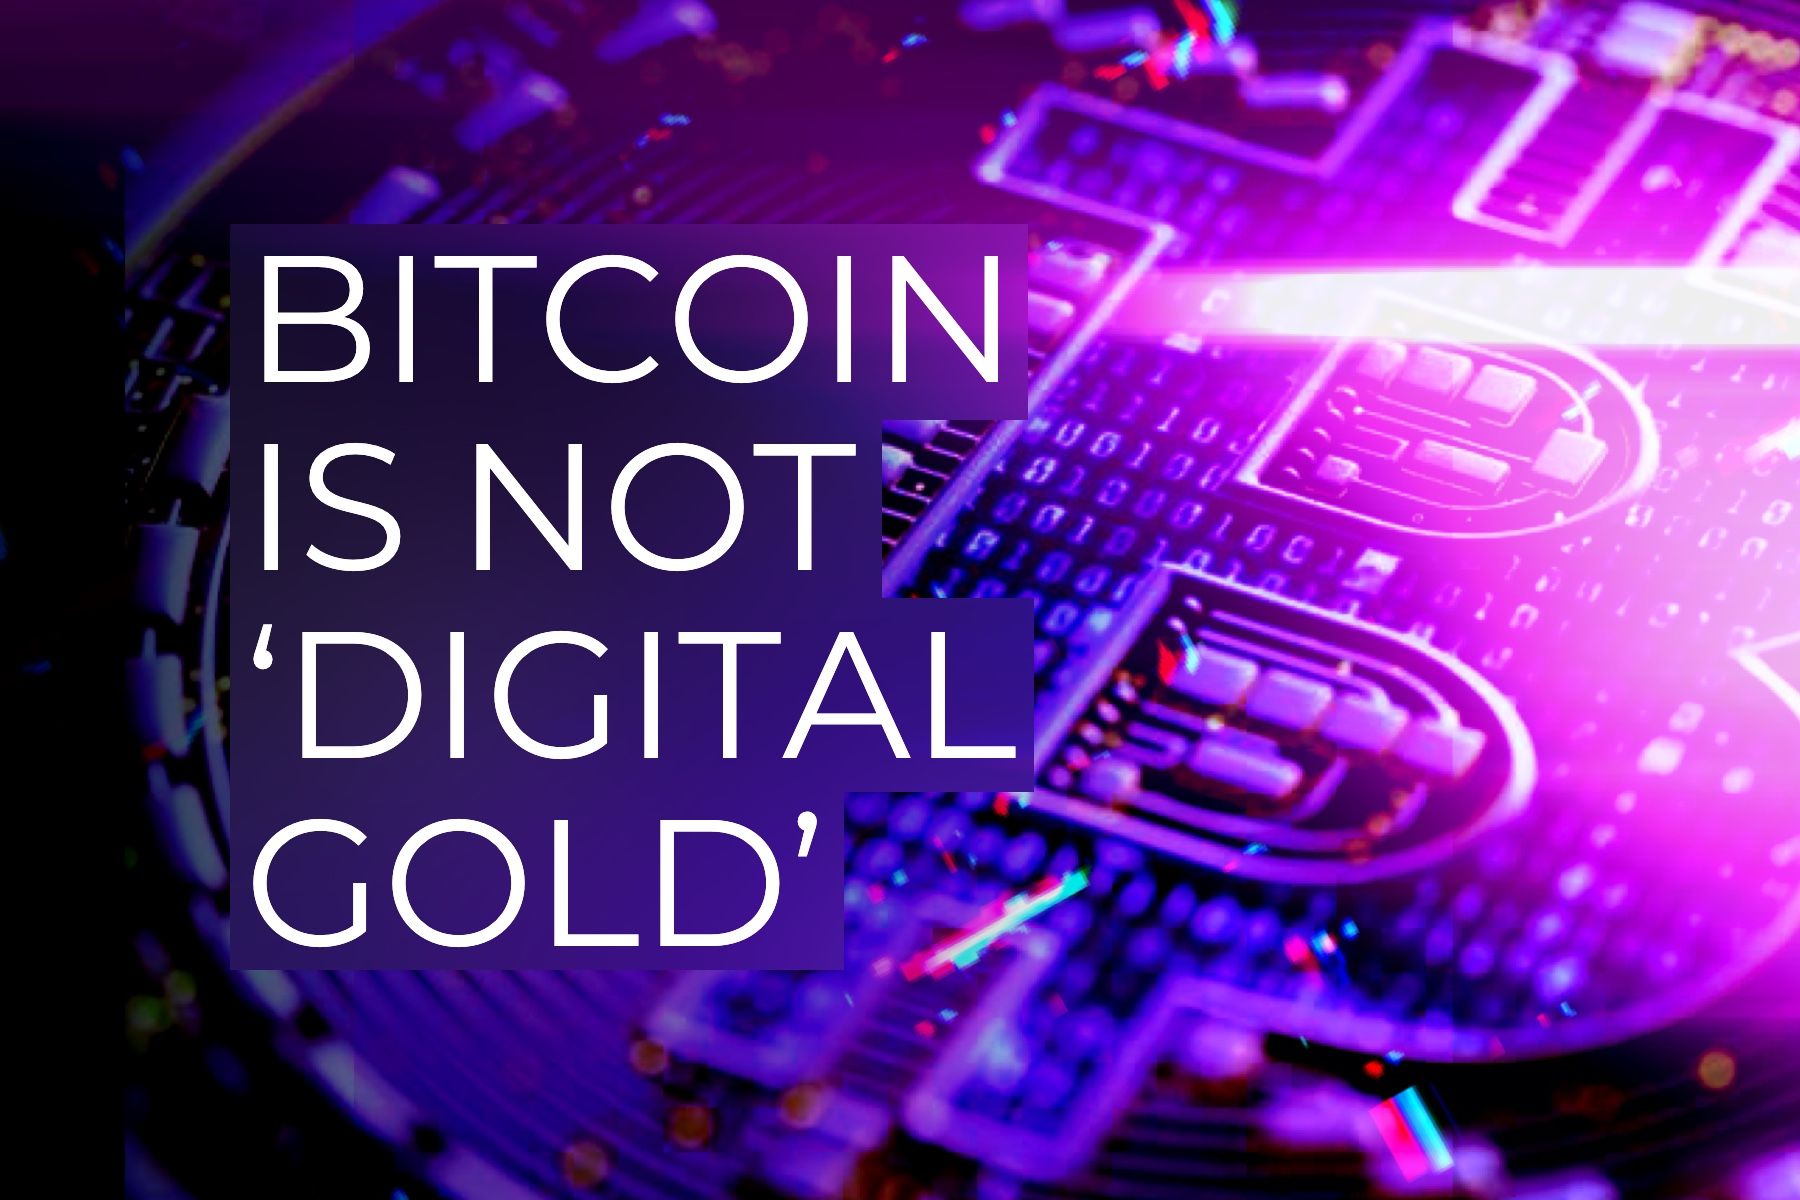 Bitcoin is not ‘digital gold’. Here’s why